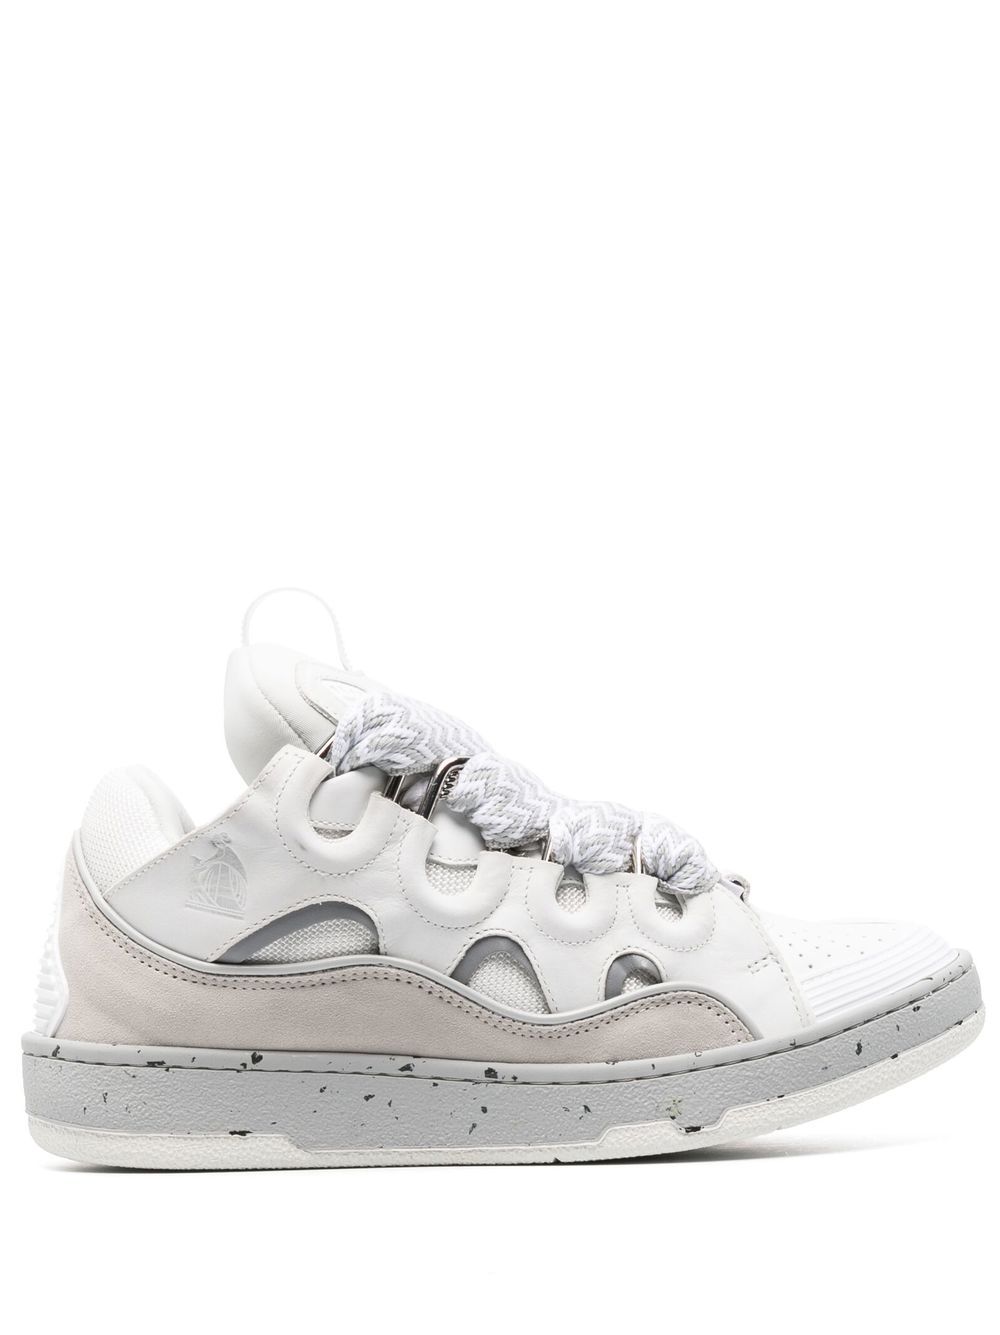 Lanvin Curb Panelled Sneakers - Farfetch